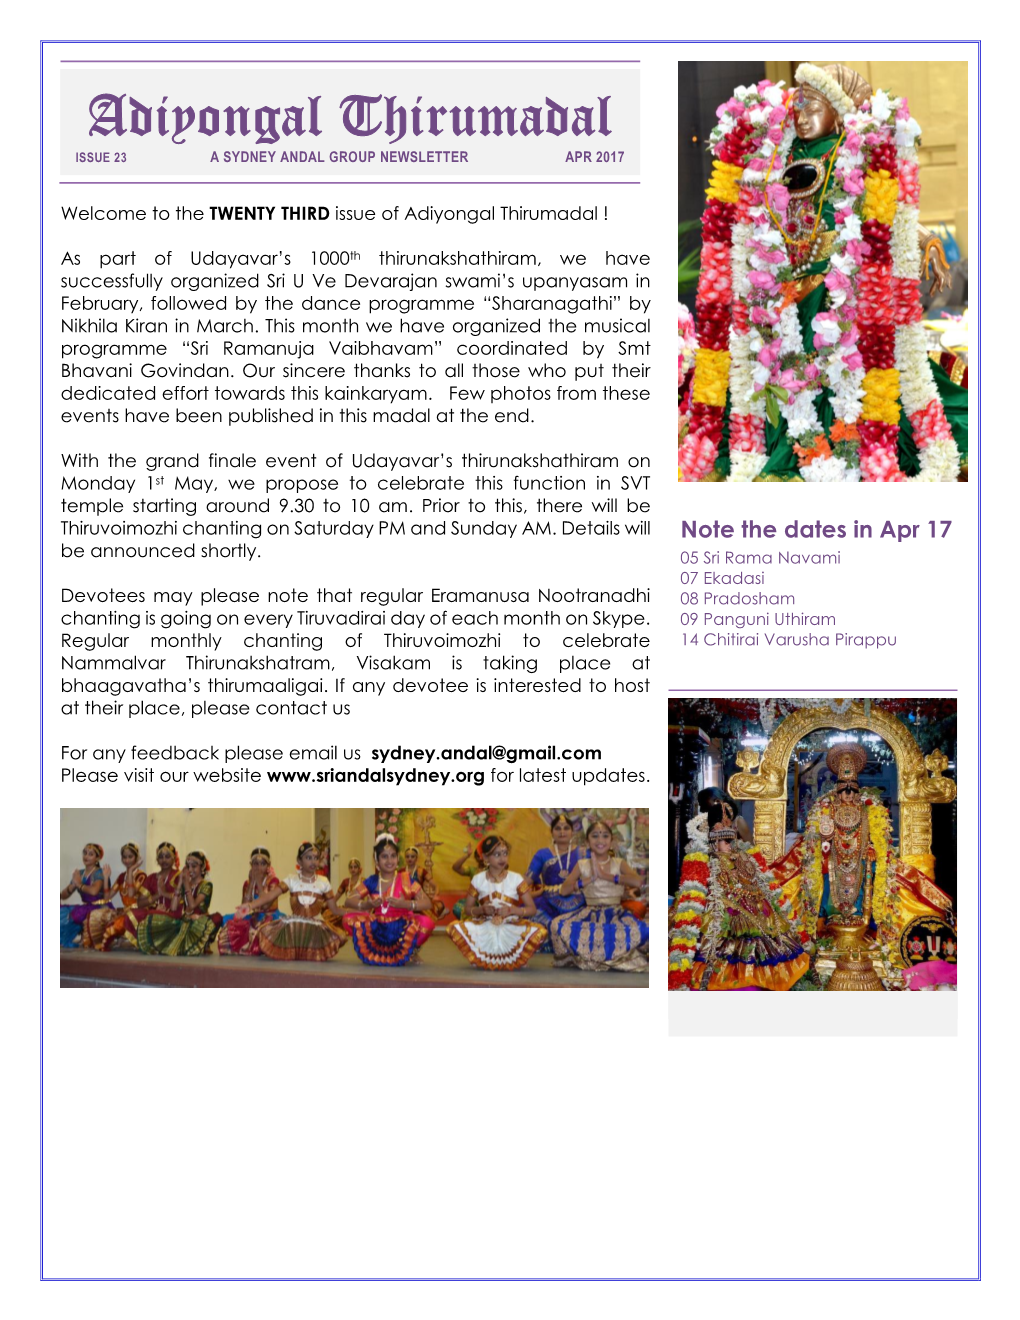 Adiyongal Thirumadal ISSUE 23 a SYDNEY ANDAL GROUP NEWSLETTER APR 2017